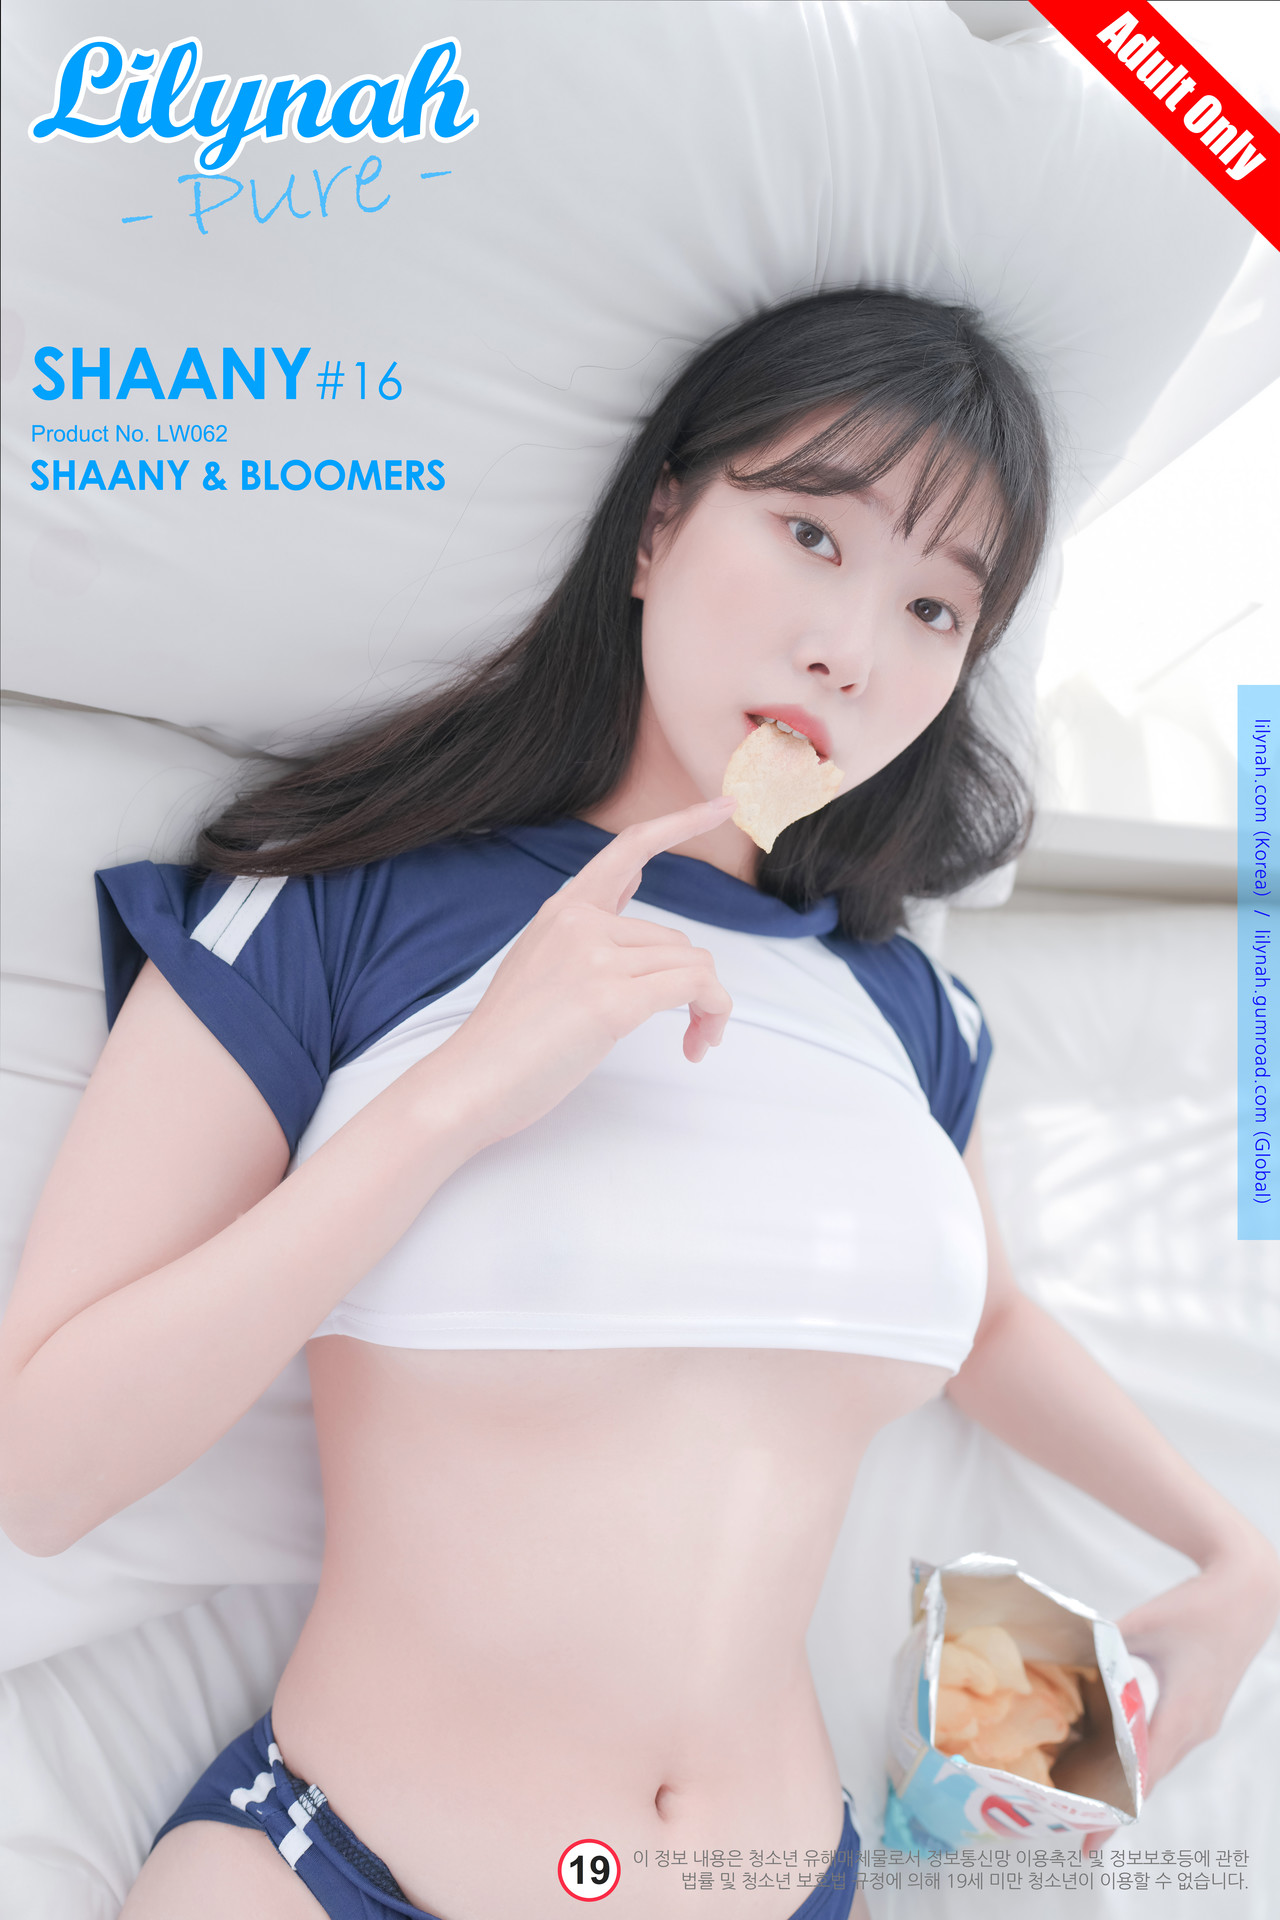 Shaany 샤니, [Lilynah] Shaany Vol.16 LW062